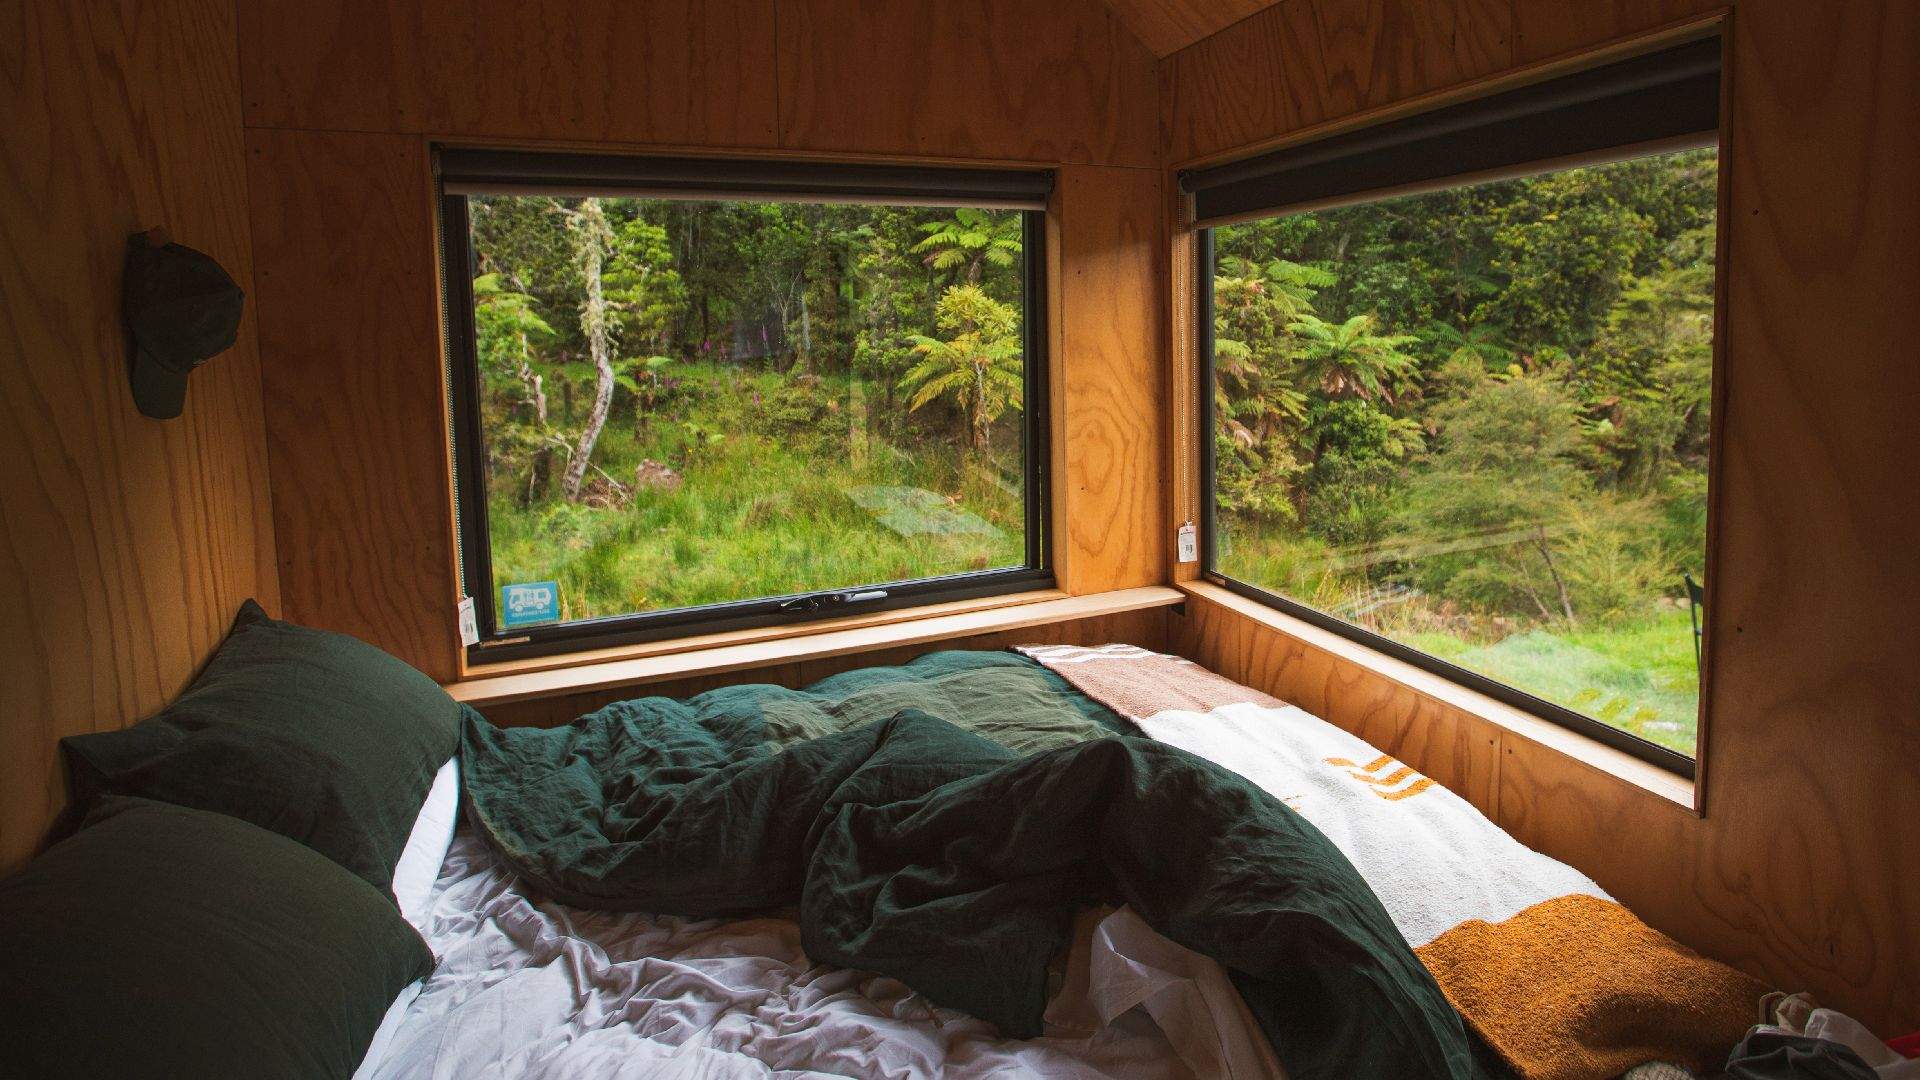 Unyoked Has Built Three New Cabins in the Kawakawa Bay Wilderness to Help You Relax and Recharge